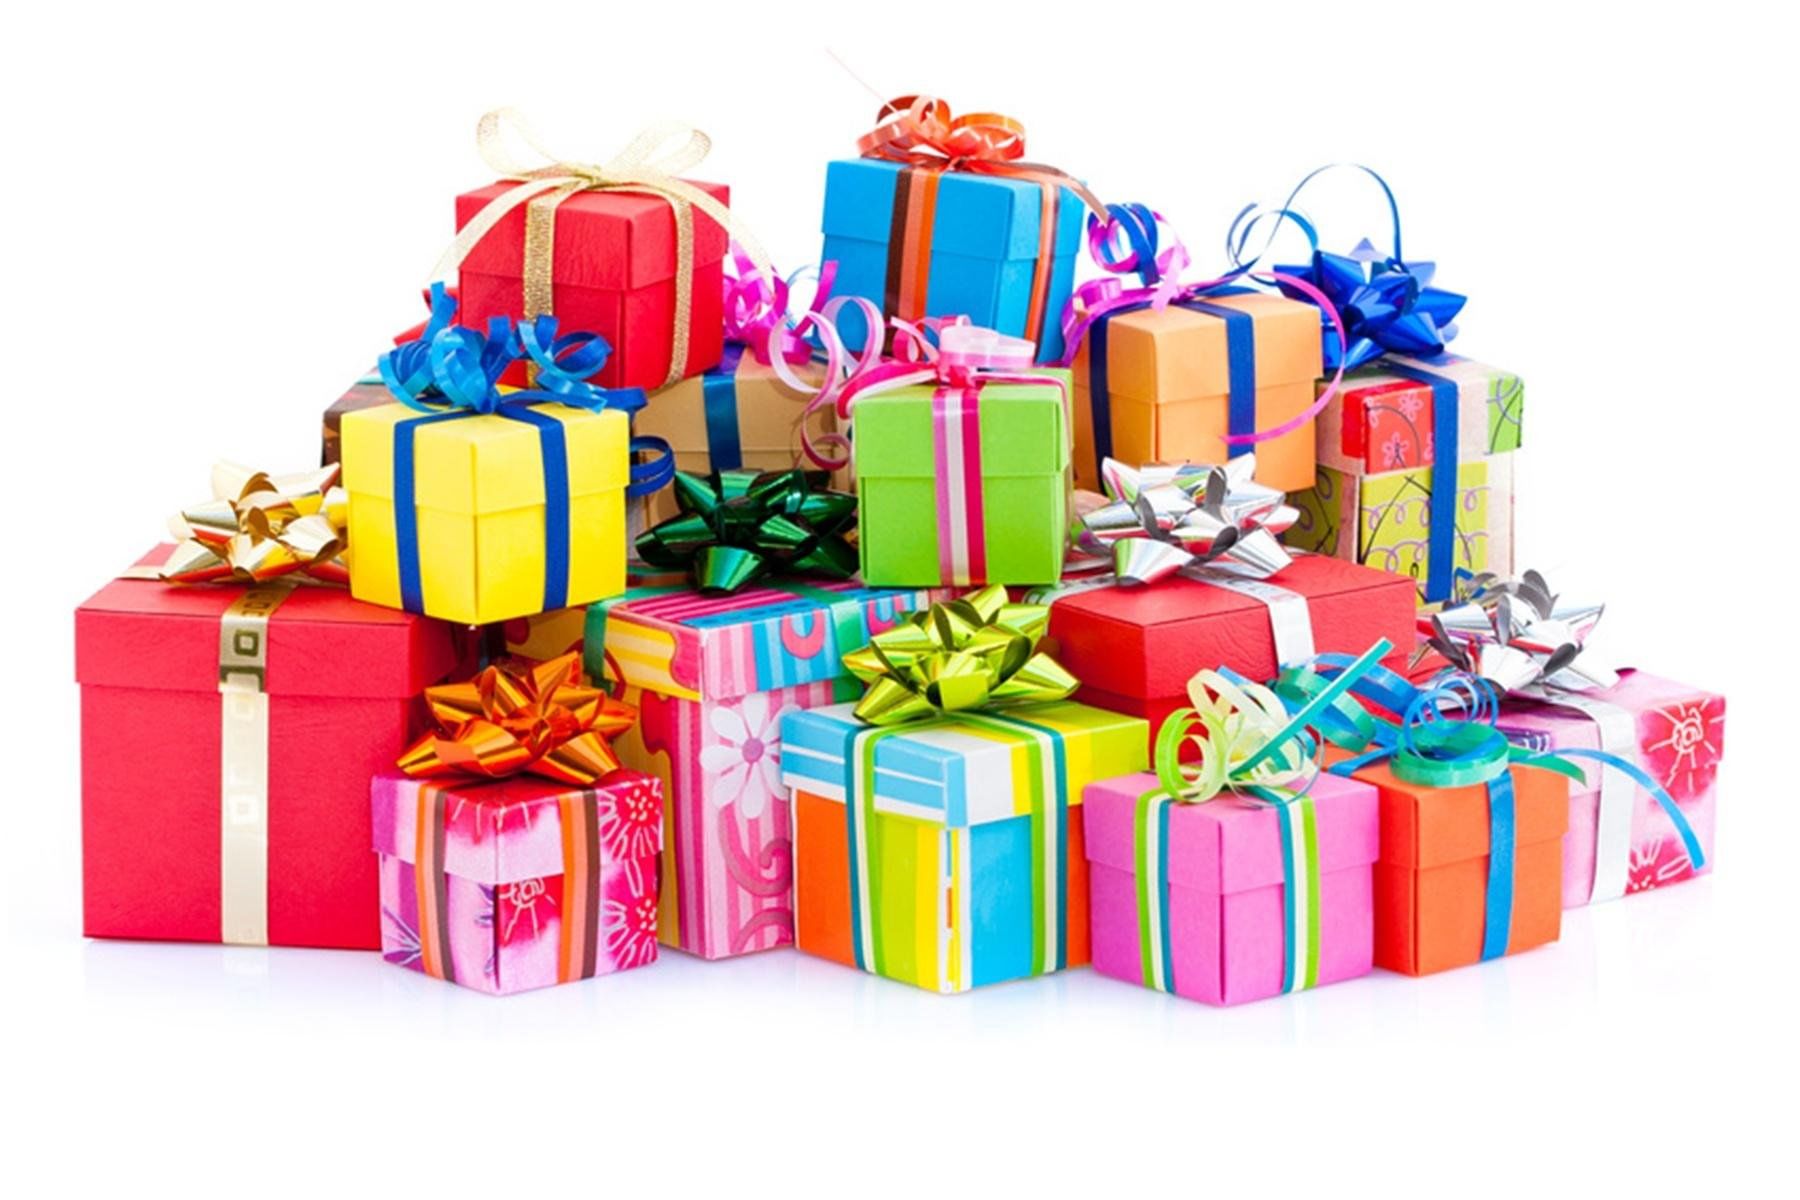 Kinds of presents